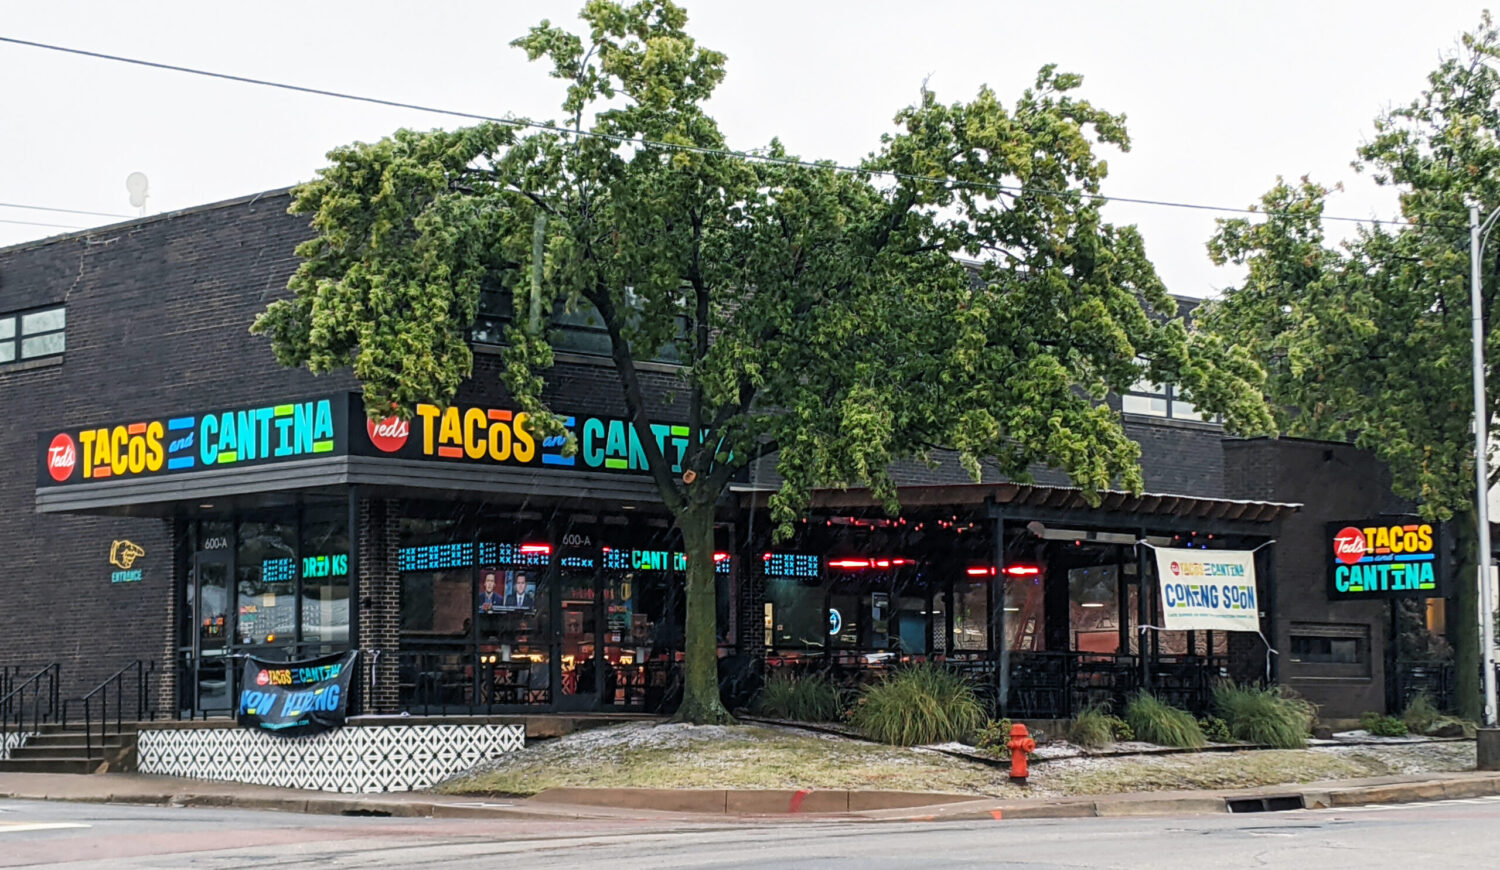 Exterior shot of the new Ted's Tacos and Cantina